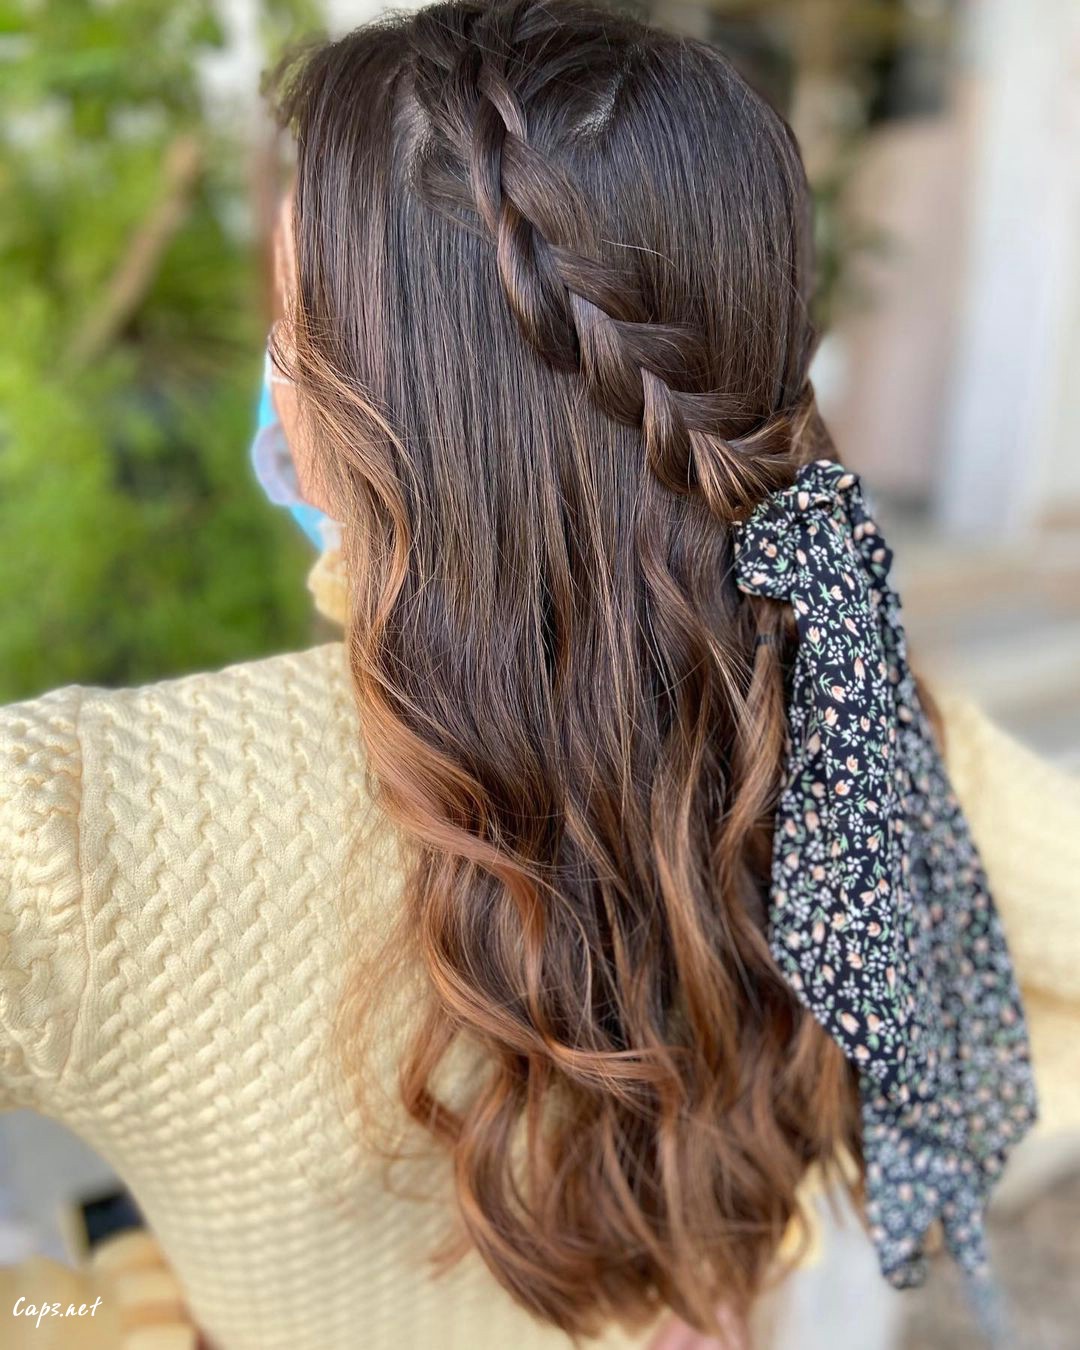 braided style works well with caramel